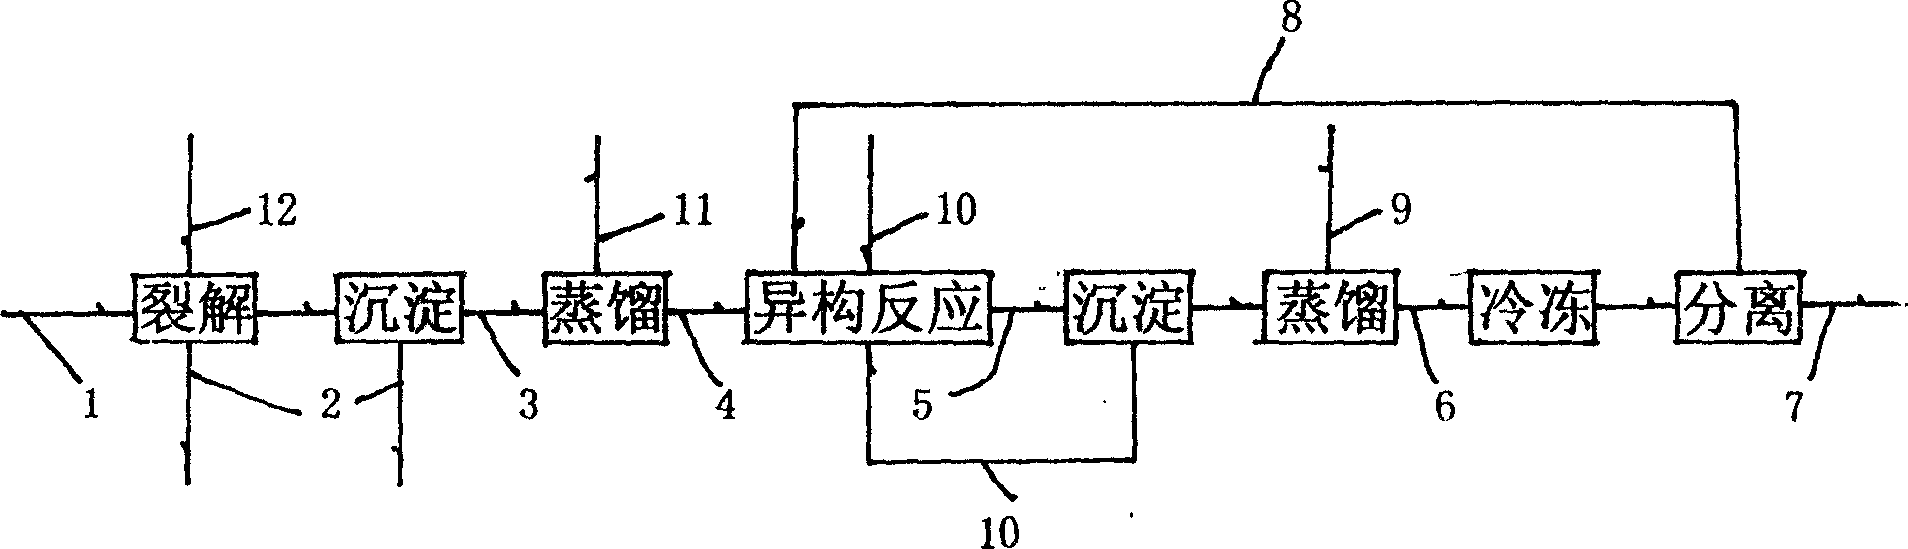 Method and apparatus for preparing camphene using light oil of pine tar